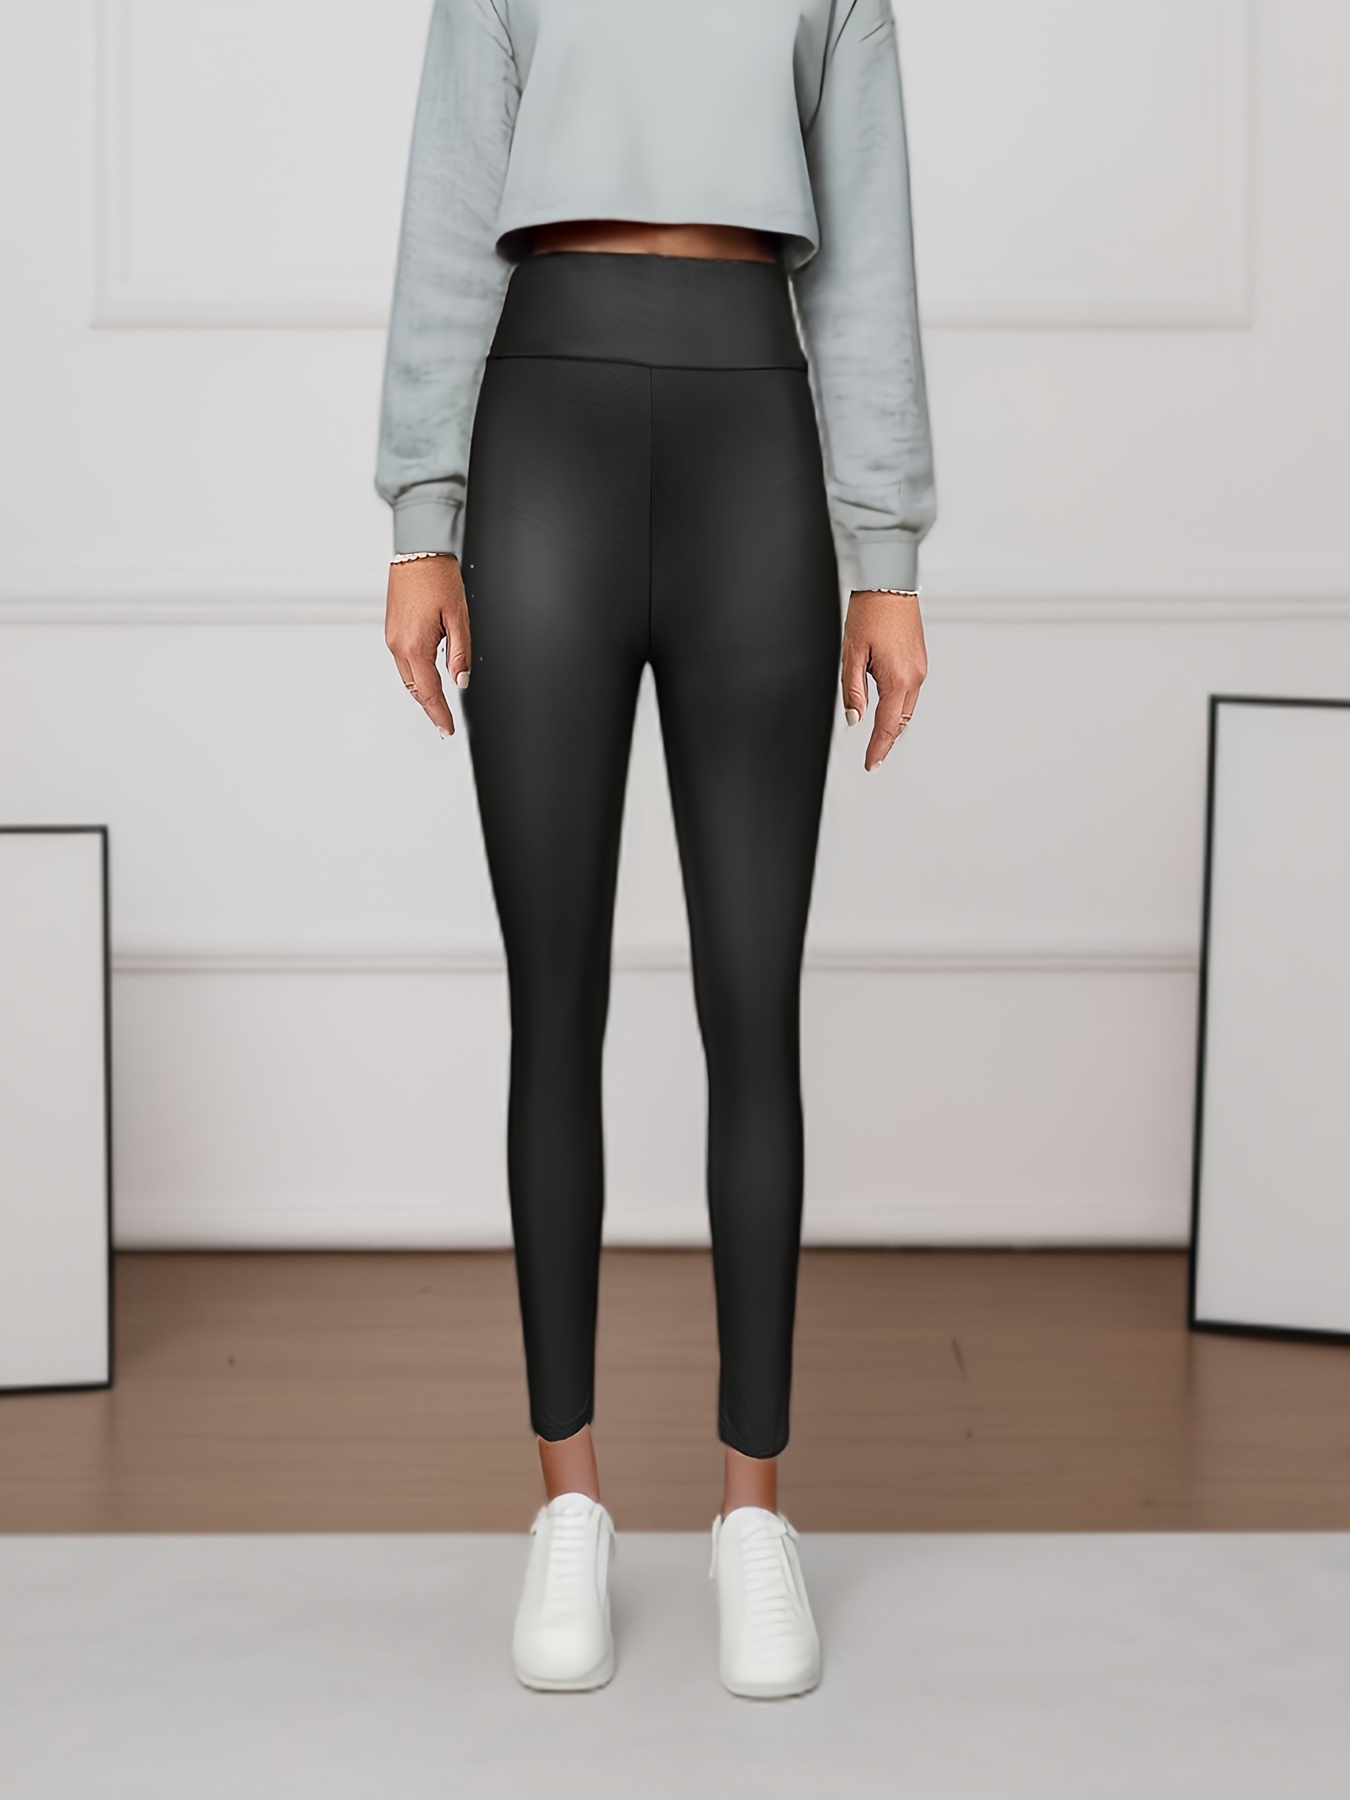 Topshop faux leather skinny trousers in black